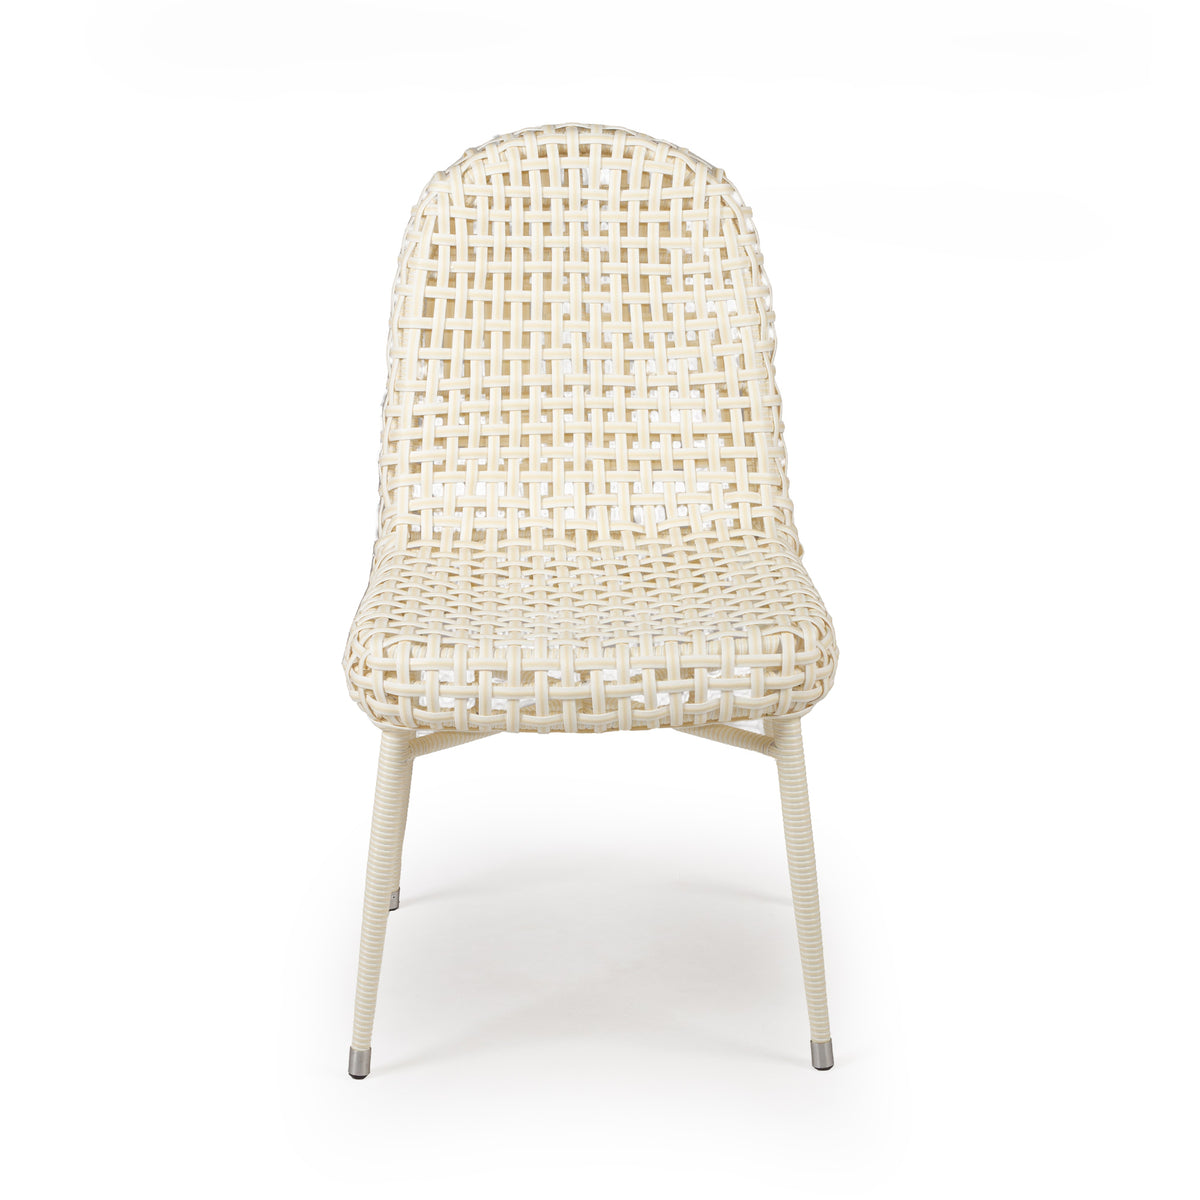 Remy Wicker Outdoor Dining Chair - Beach White